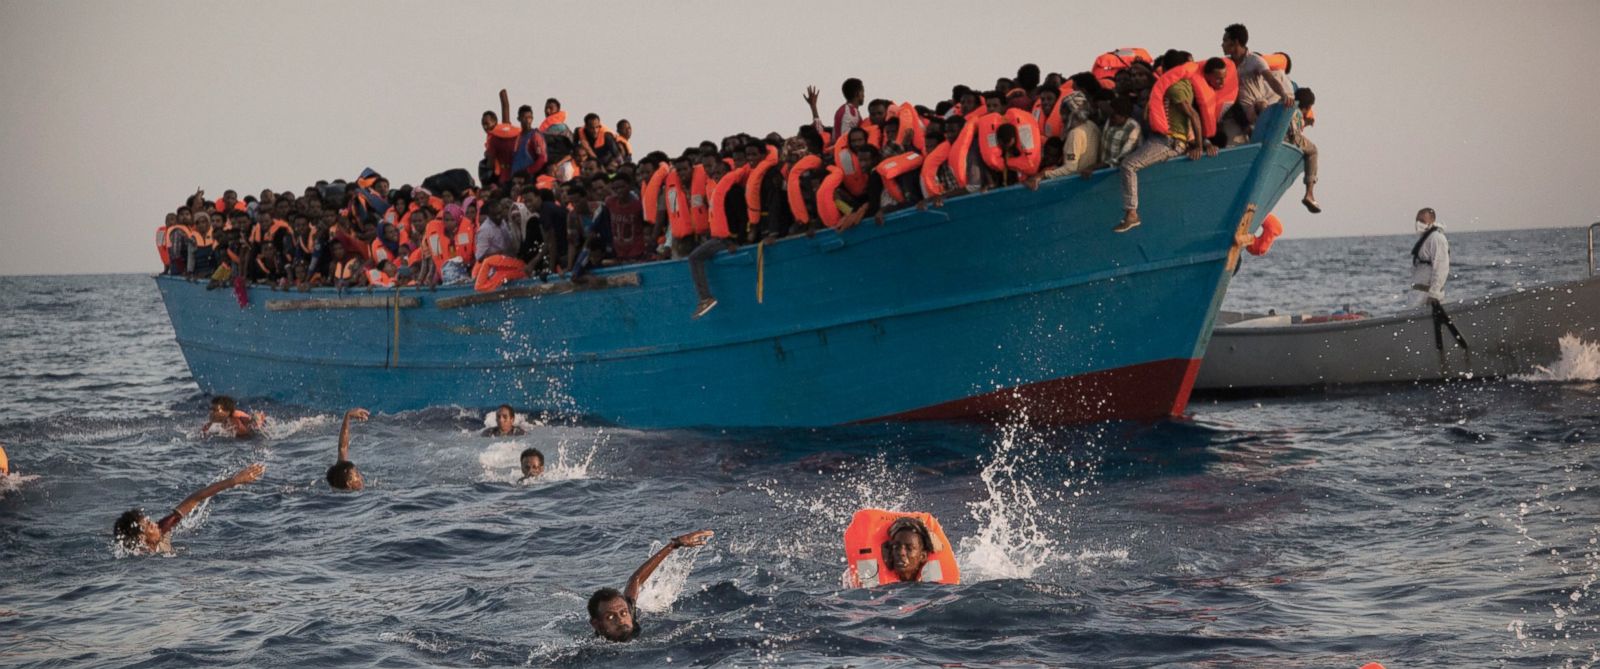 PHOTO: Migrants, most of them from Eritrea, jump into the water from a crowded wooden boat as they are helped by members of an NGO during a rescue operation at the Mediterranean sea, about 13 miles north of Sabratha, Libya, Aug. 29, 2016.